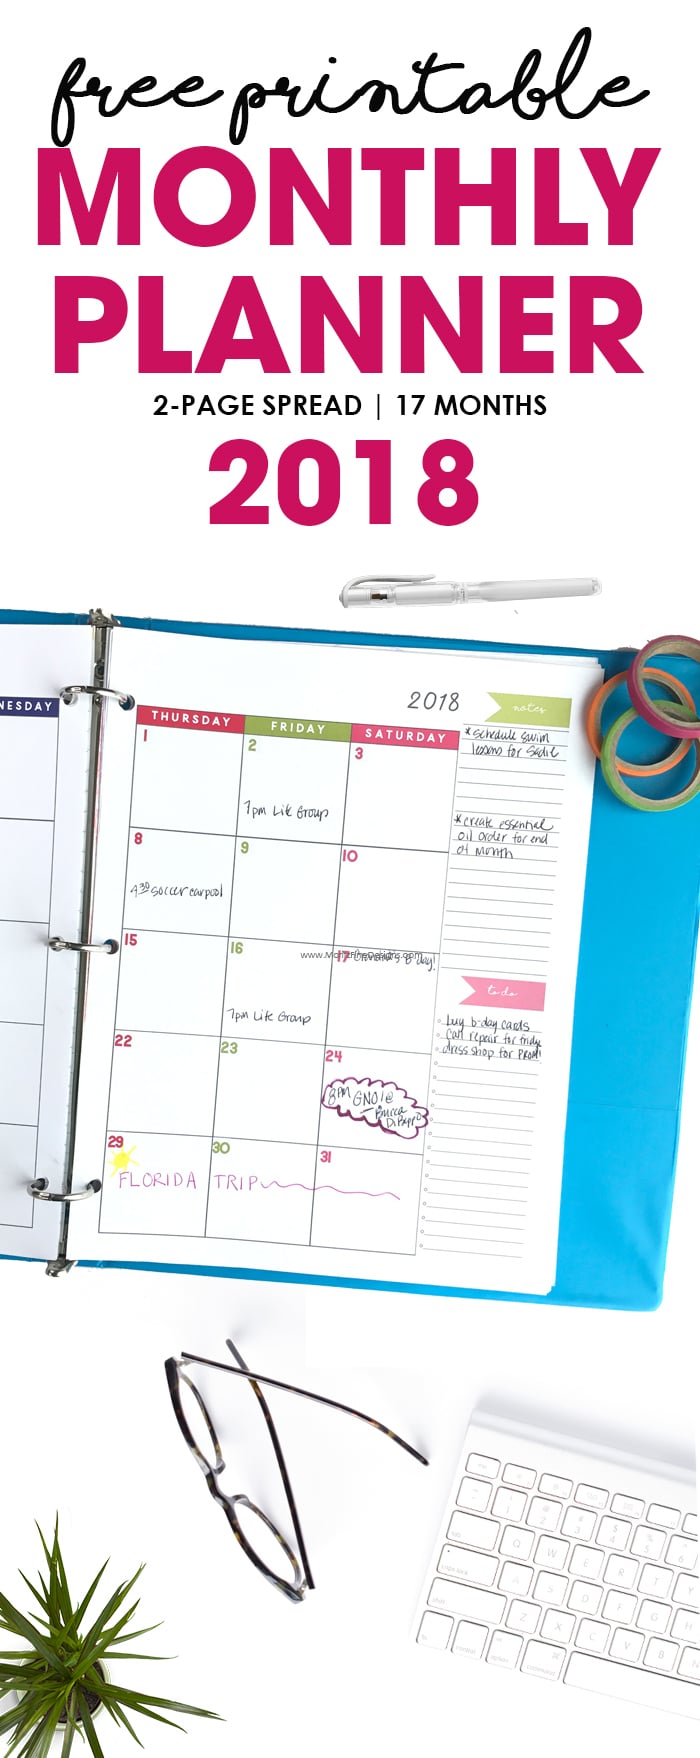 2018 Monthly Planner